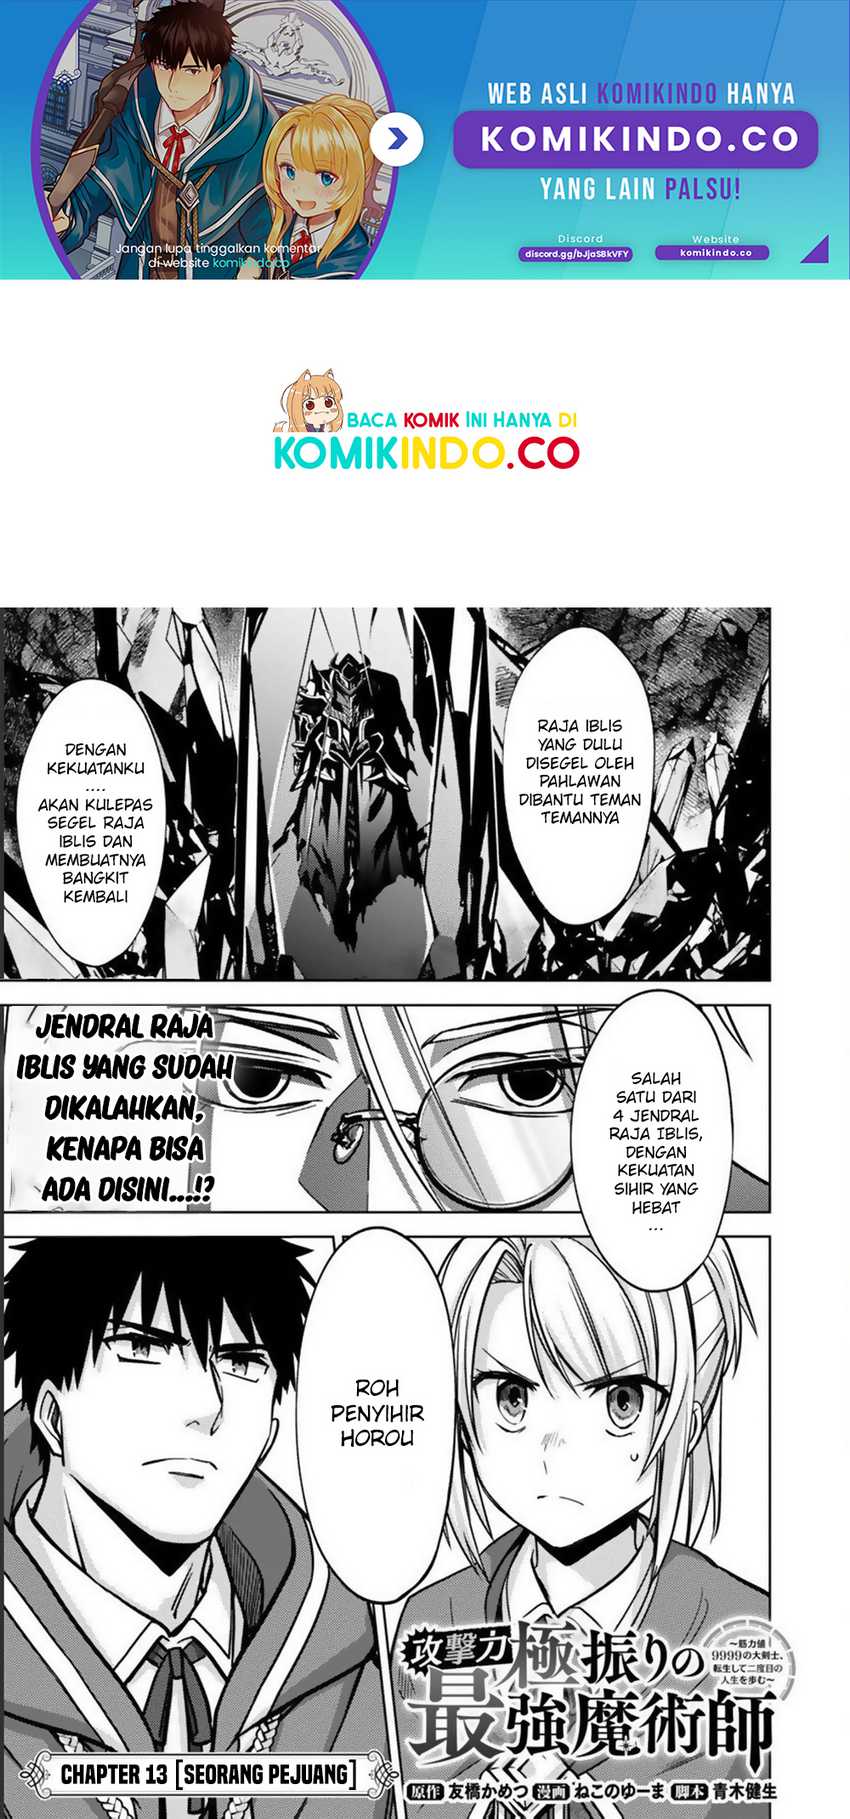 The Reincarnated Swordsman With 9999 Strength Wants To Become A Magician! Chapter 13